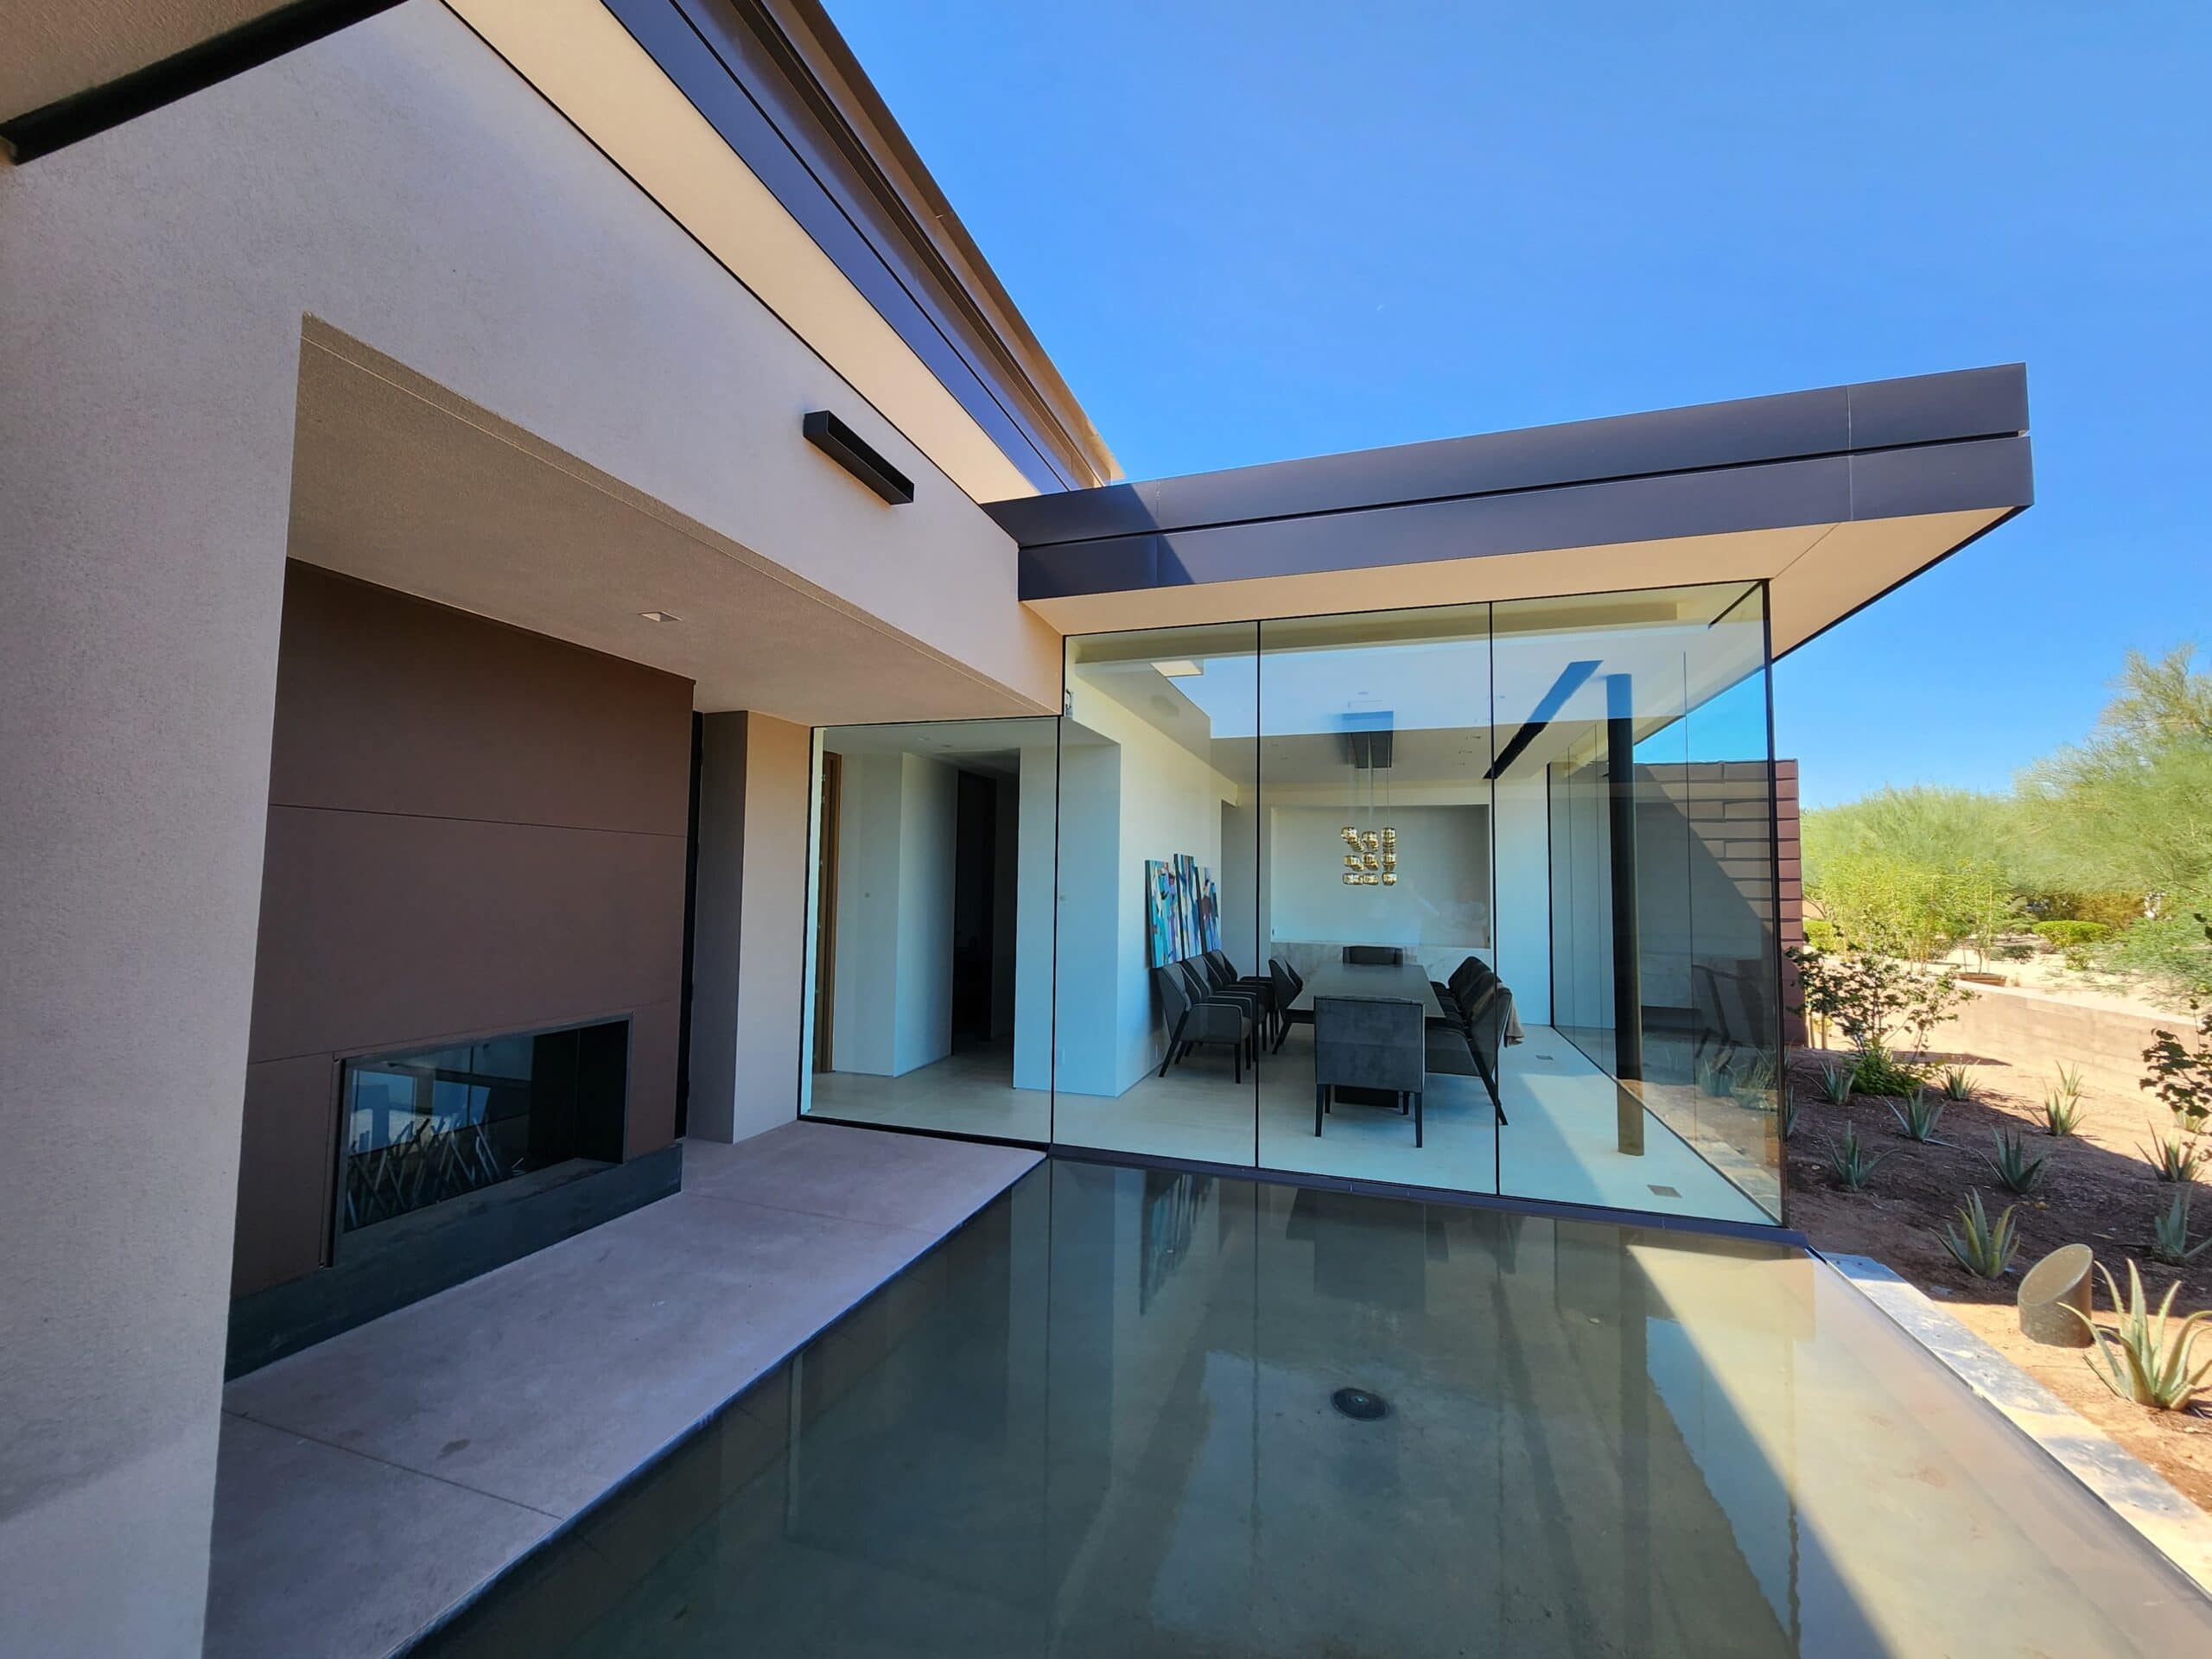 A modern home with glass walls and a pool featuring spray foam roofing for utmost insulation and minimal problems.